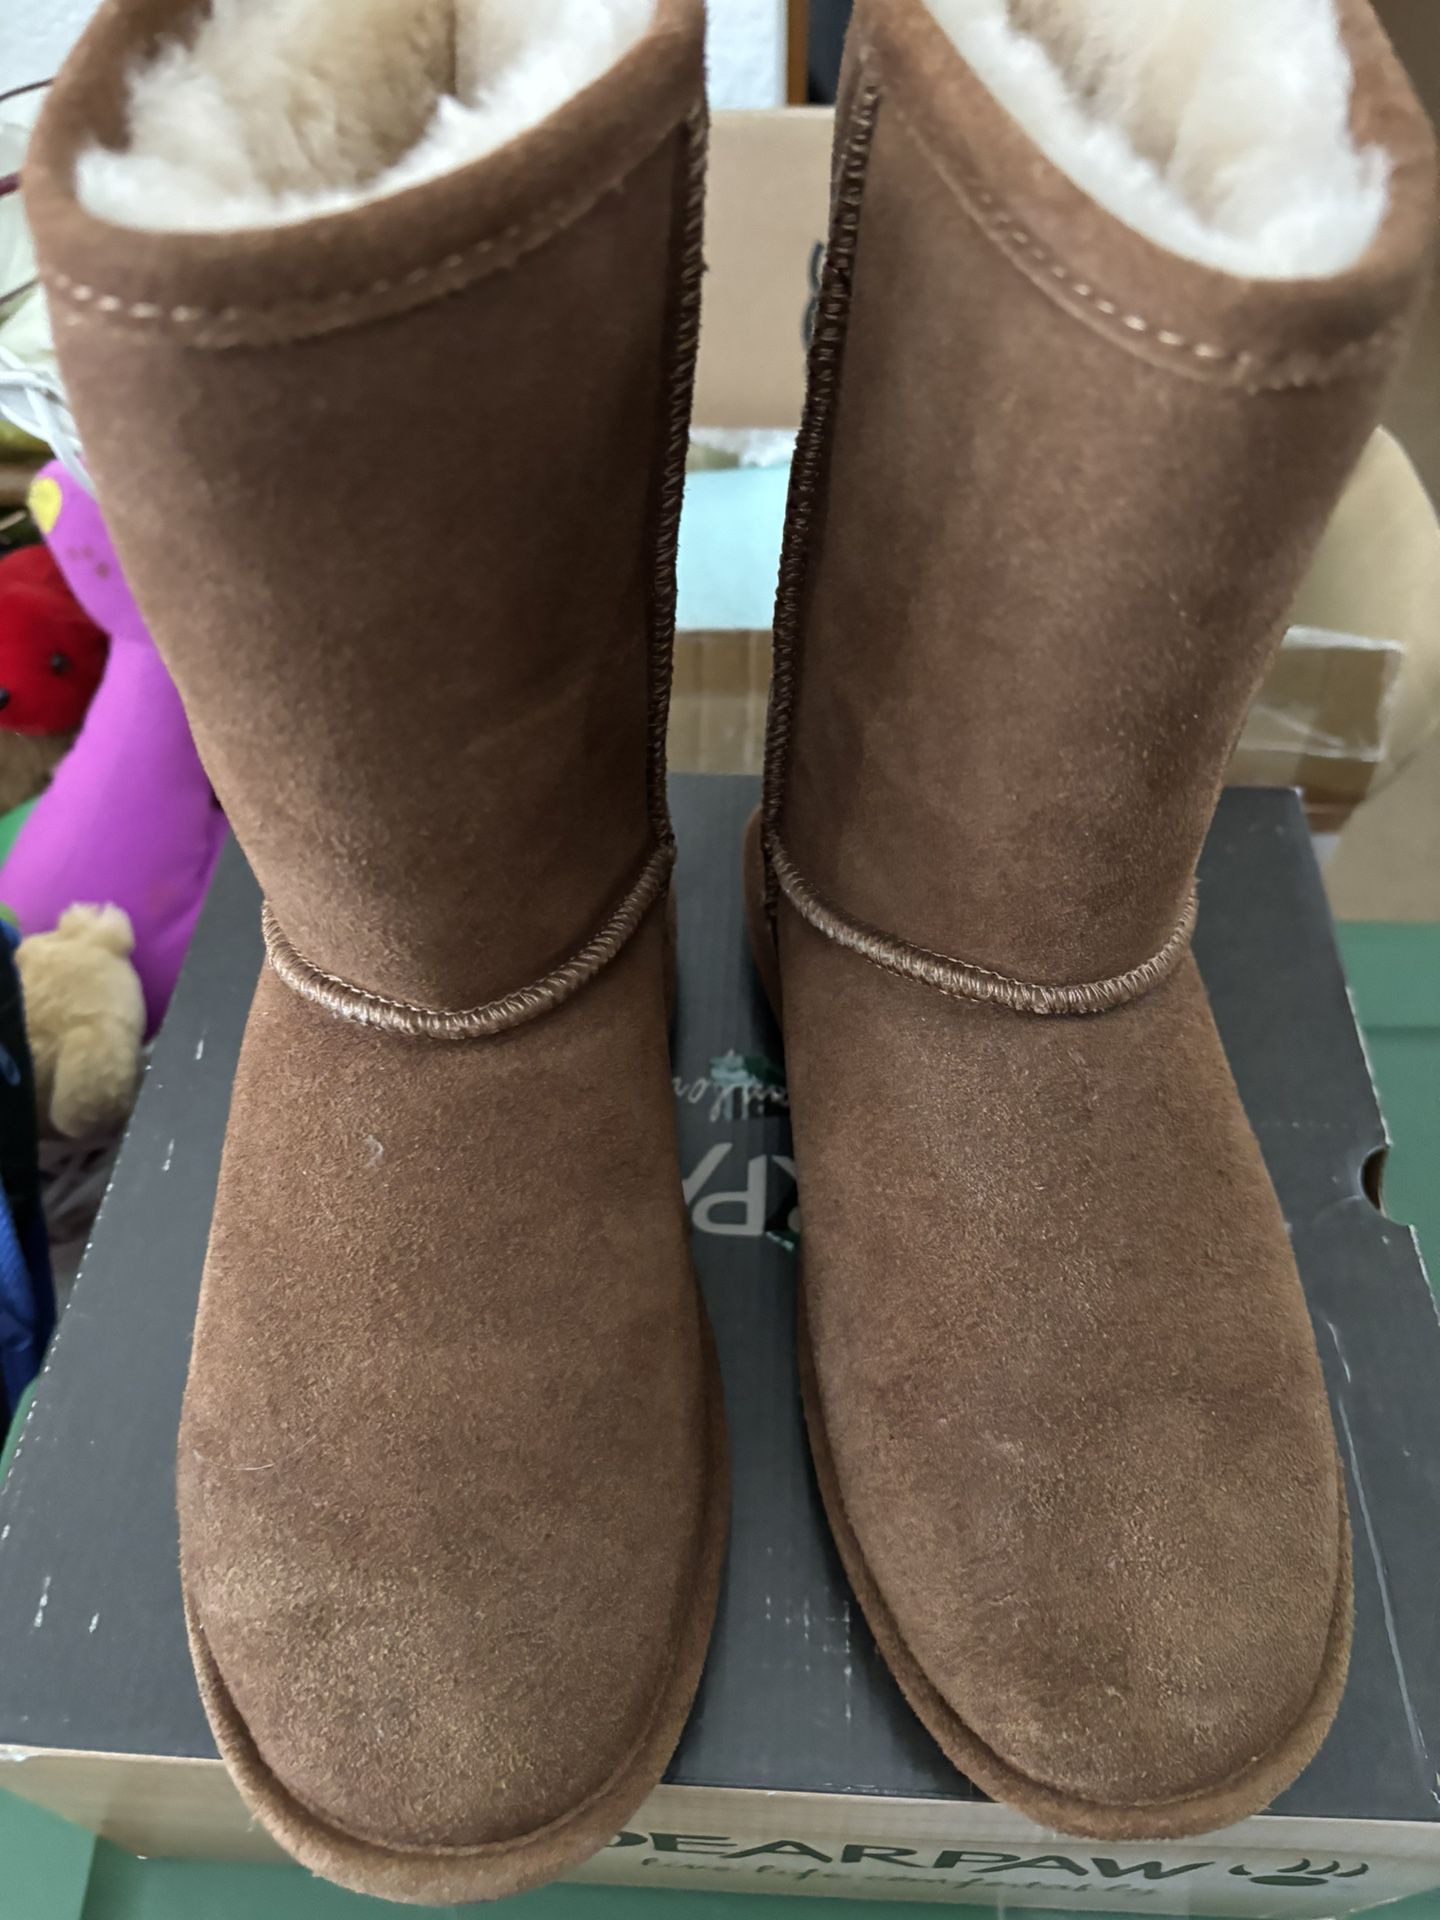 Bearpaw Fur Lined Preowned Mid Calf Hickory  Emma style  Brown Size 7